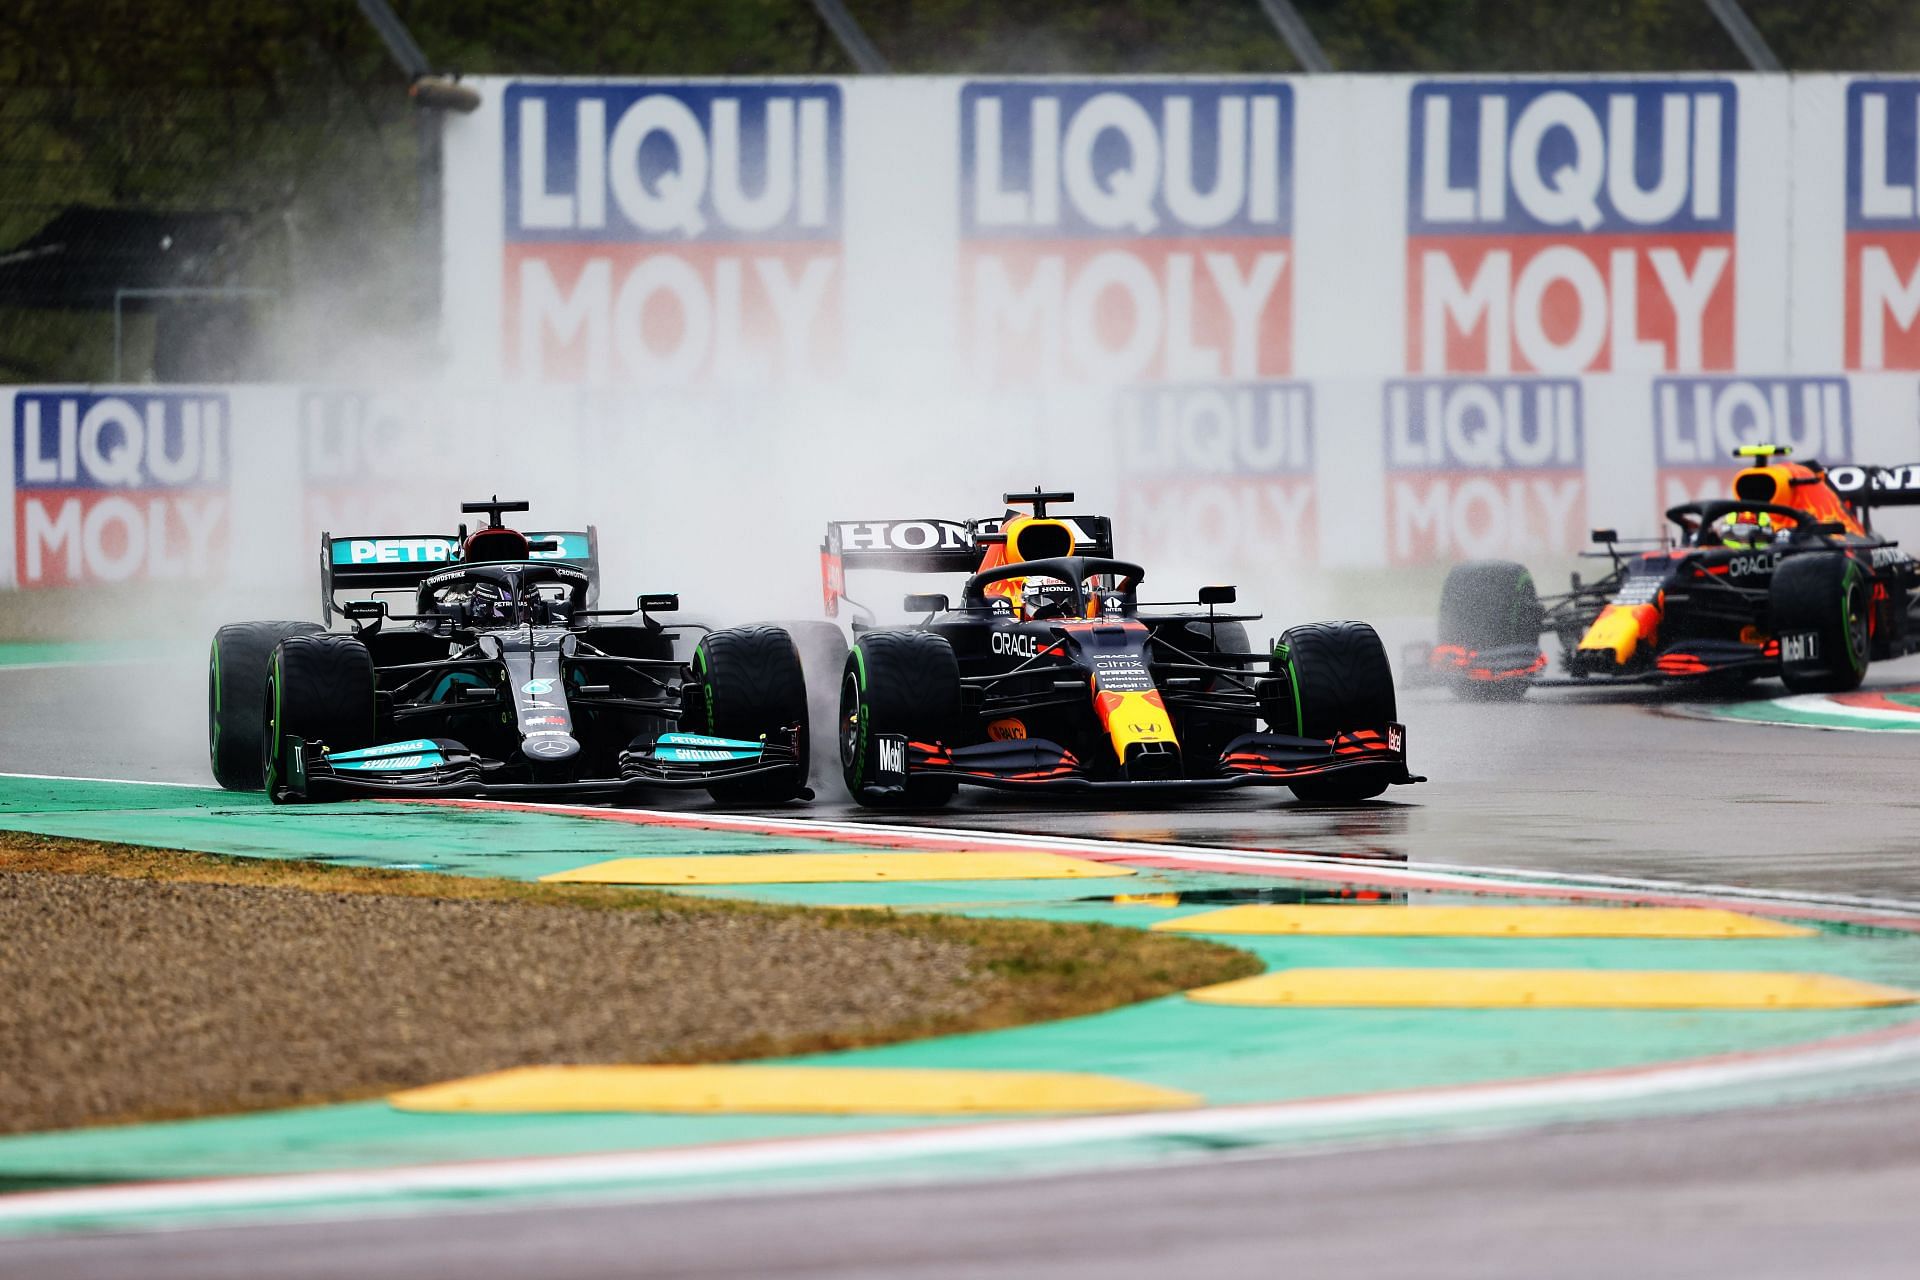 The 2021 F1 season has featured as many as four races affected by rain.